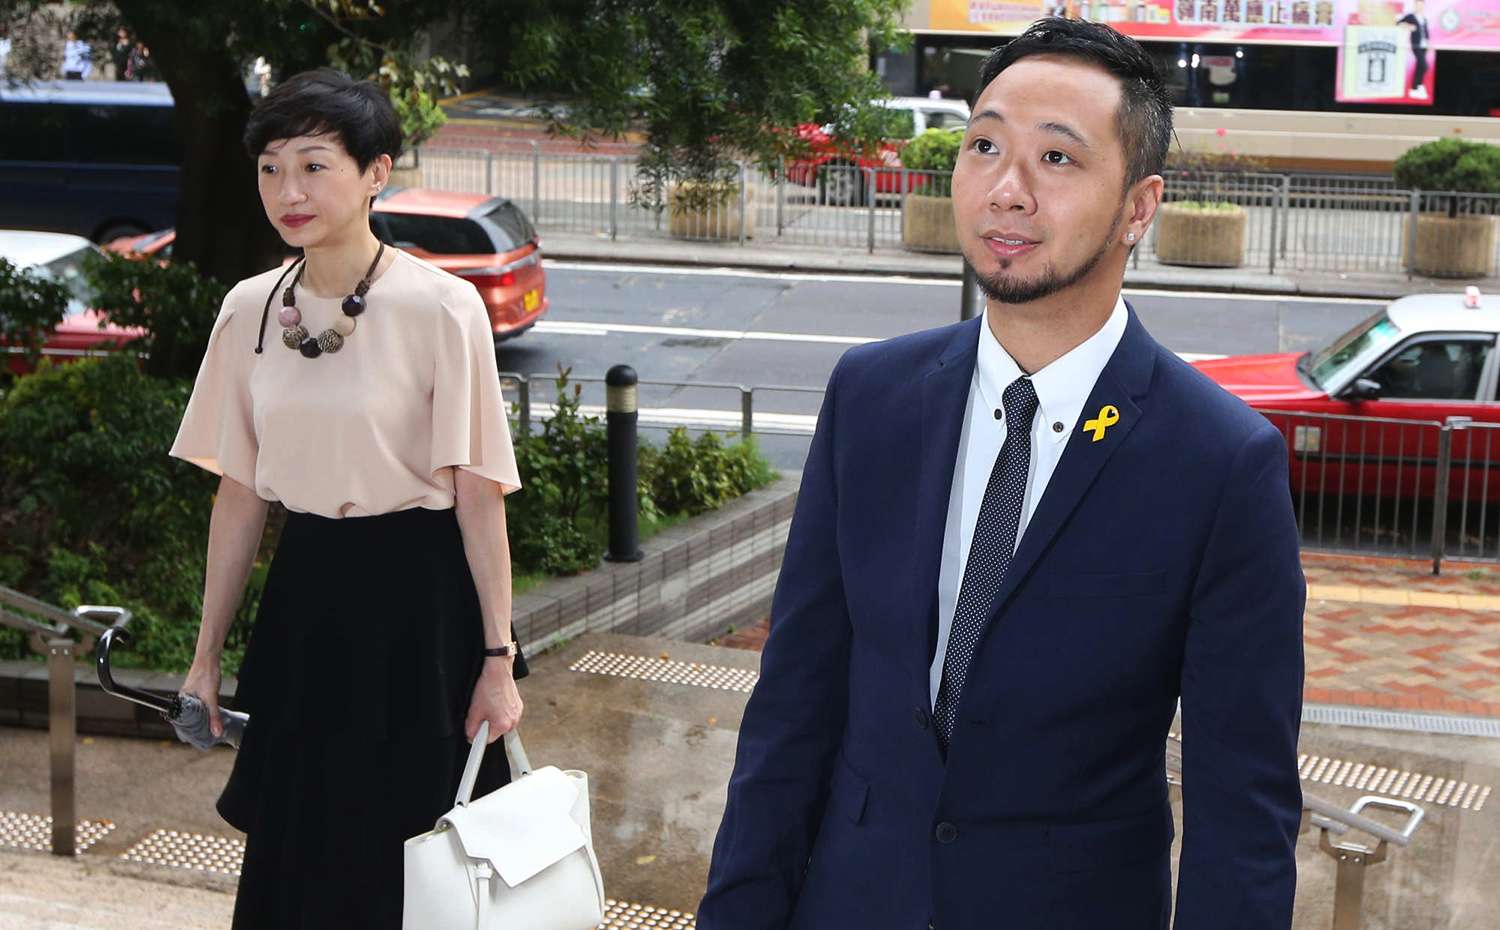 Pro-democracy activist and Occupy protester Ken Tsang arriving at Kowloon City Court on Monday. Photo: David Wong